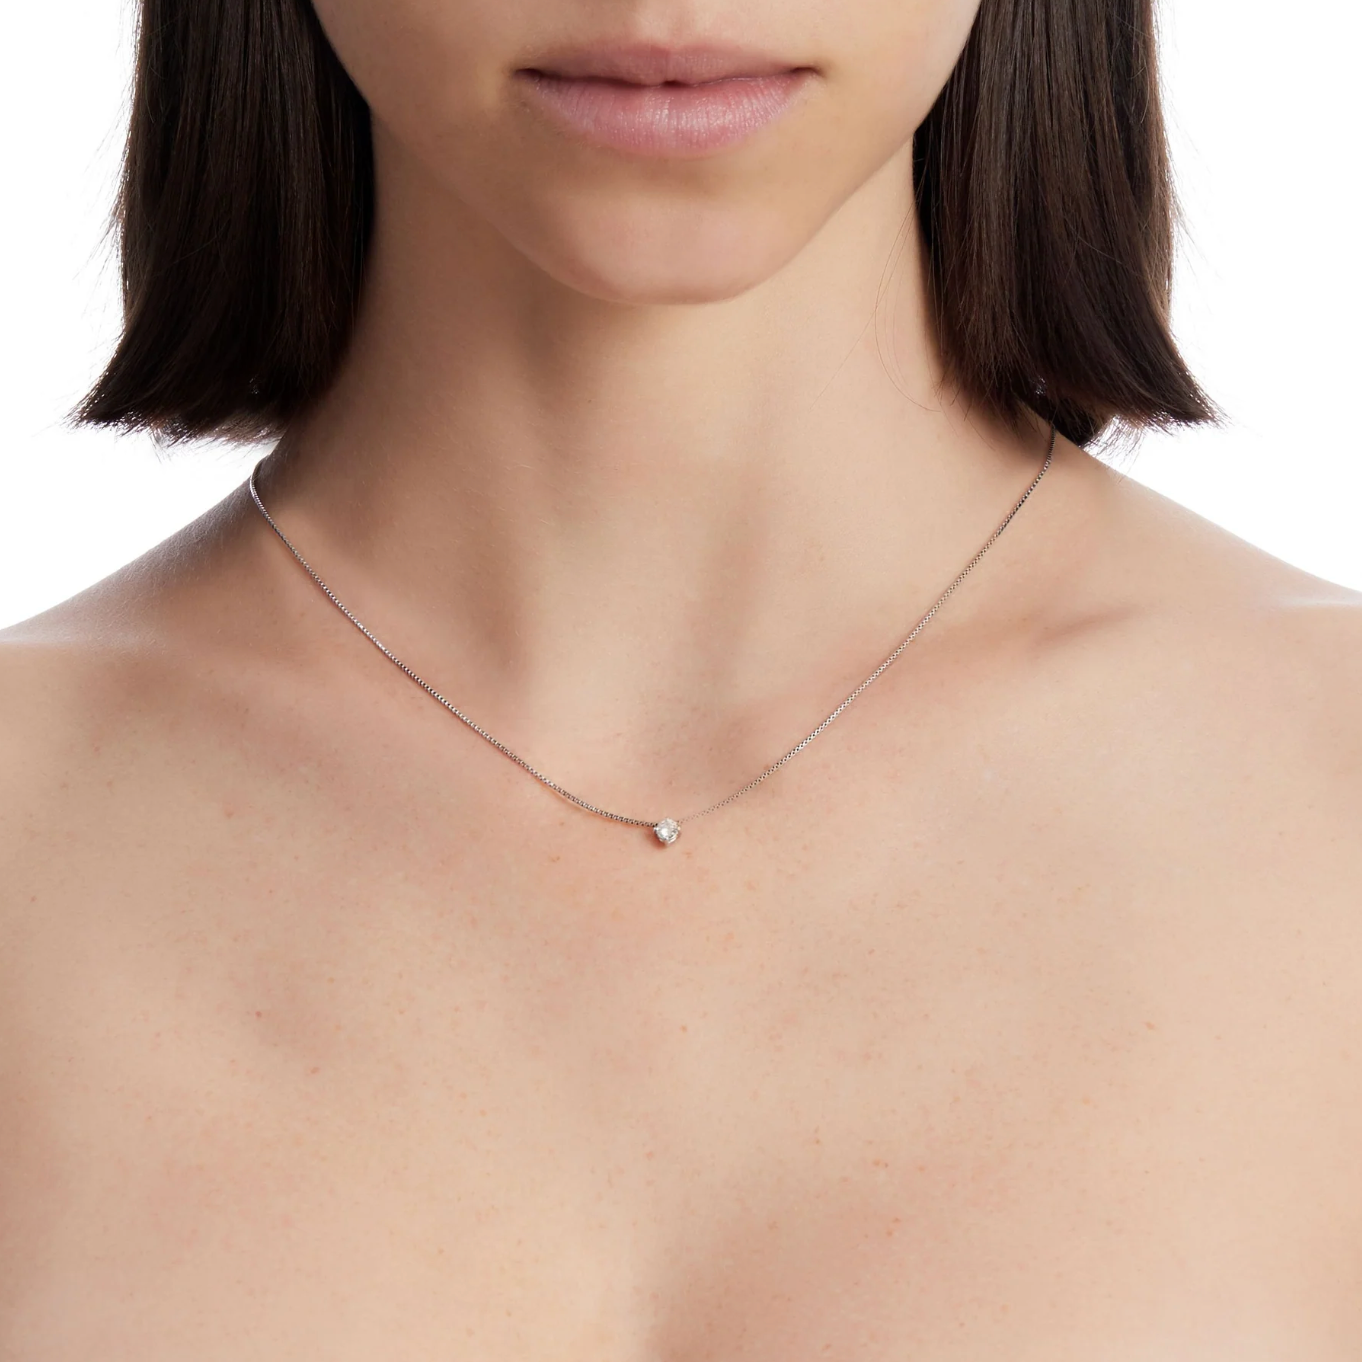 SPECIAL NECKLACE IN 18K WHITE GOLD WITH SOLITARY DIAMOND